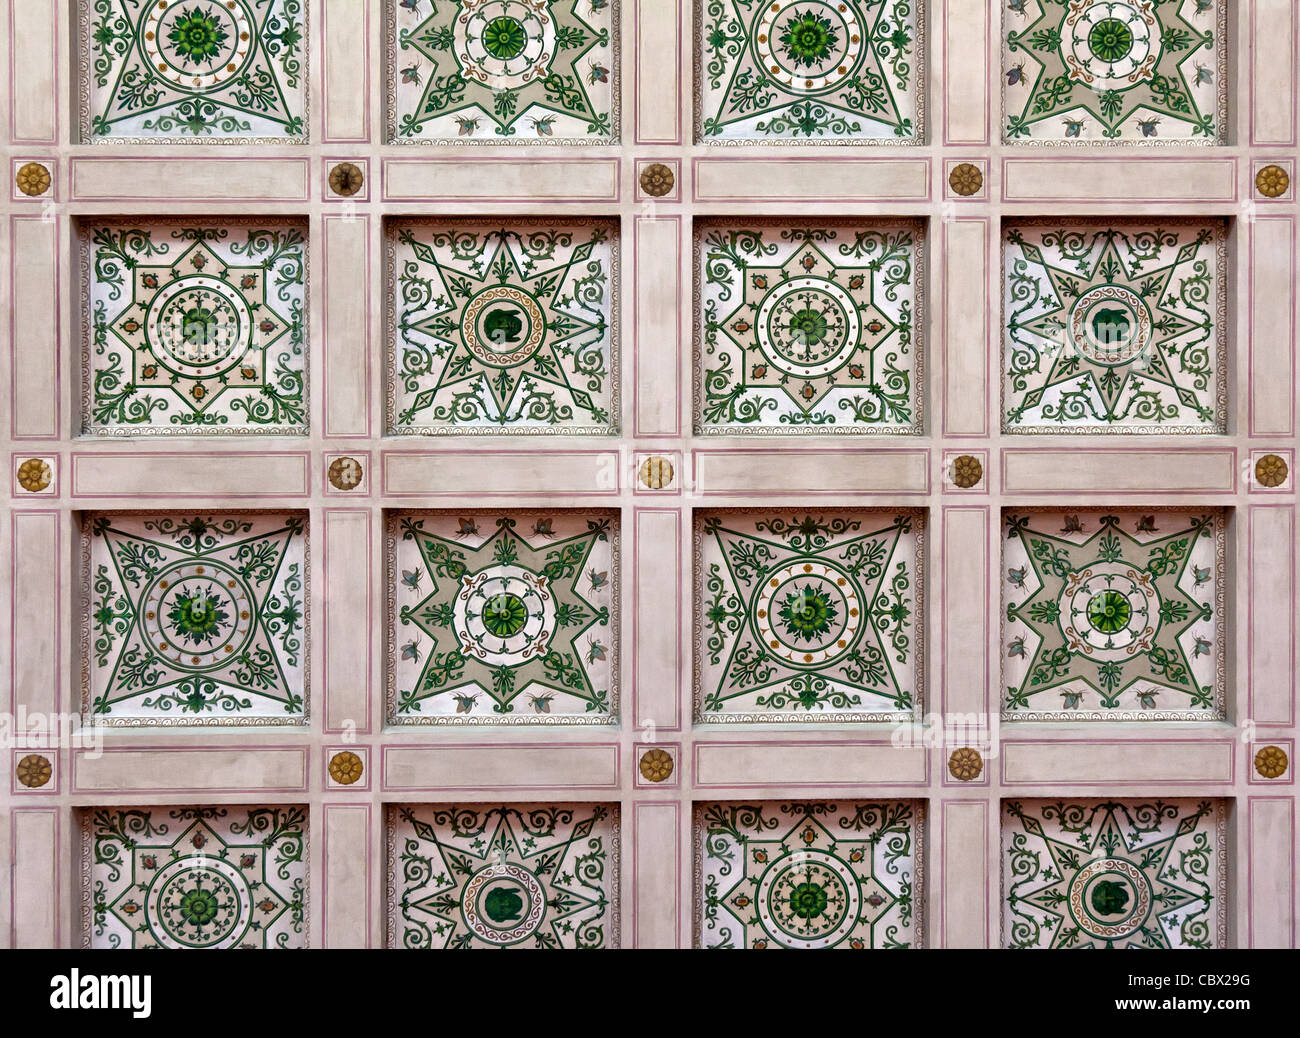 painted ceiling at the Hermitage Museum in St. Petersburg, Russia Stock Photo